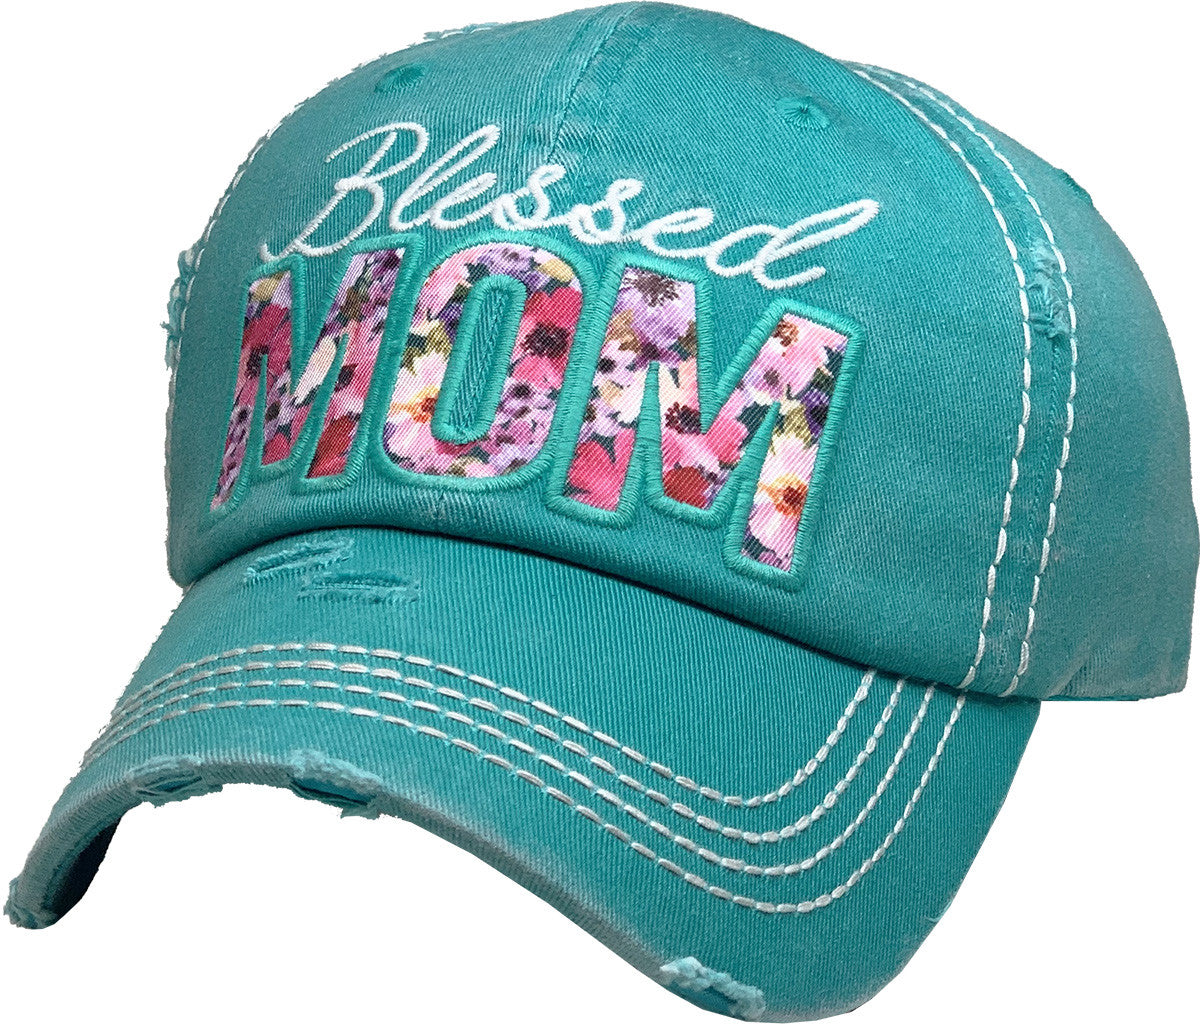 Blessed MOM Floral Patch Vintage Look Distressed Baseball Cap - Asst.